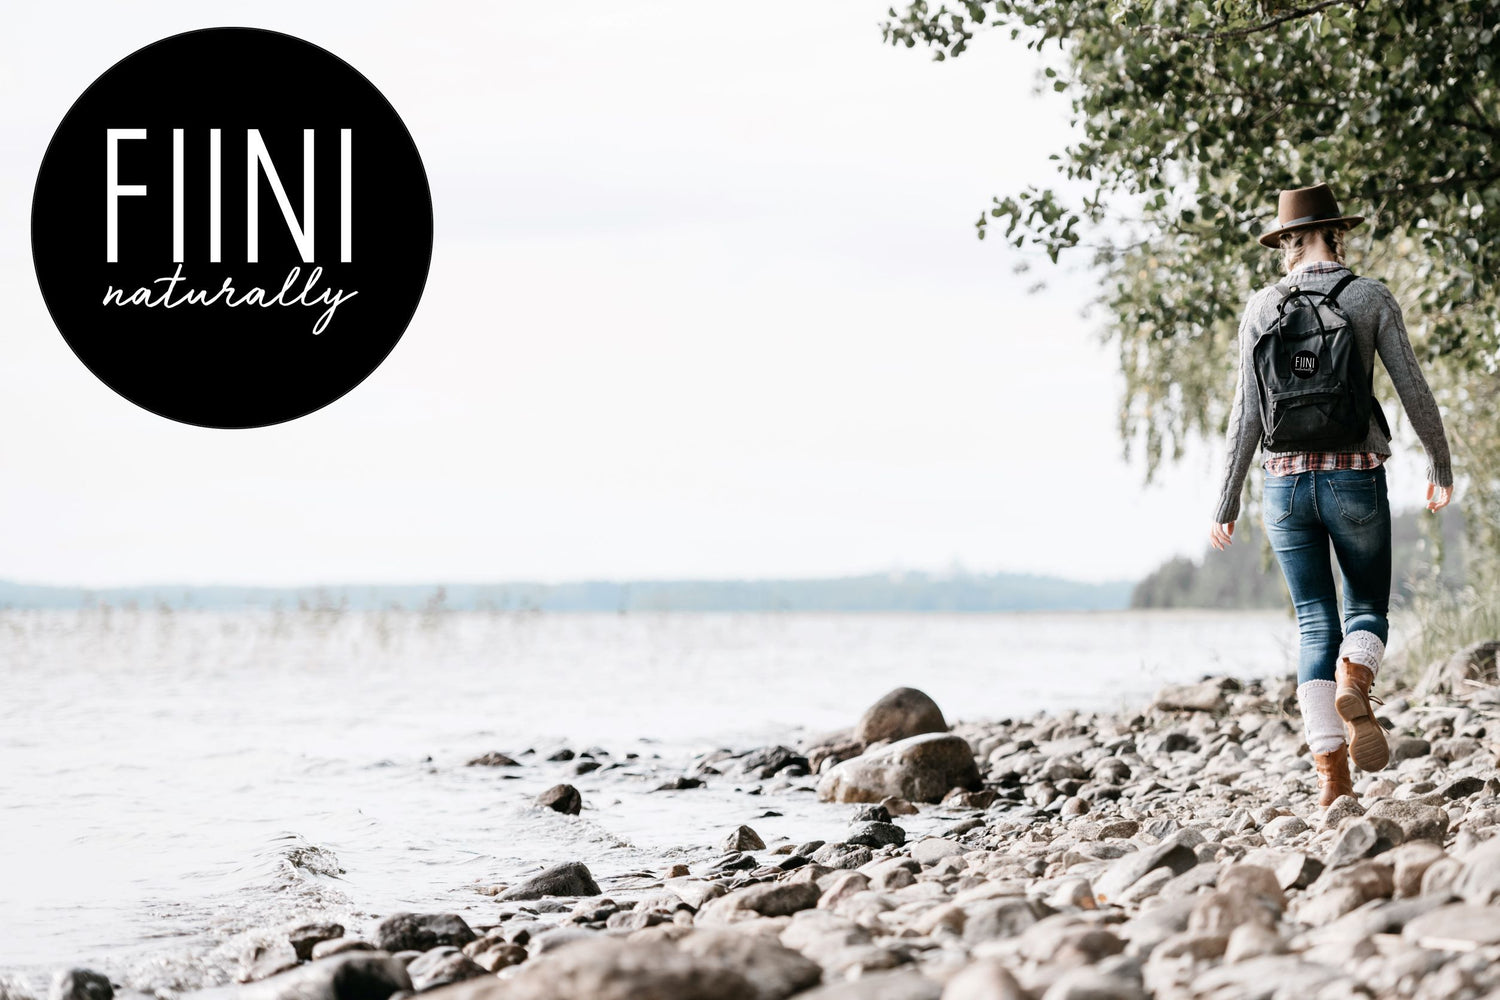 FIINI naturally - organic cleaning and care products